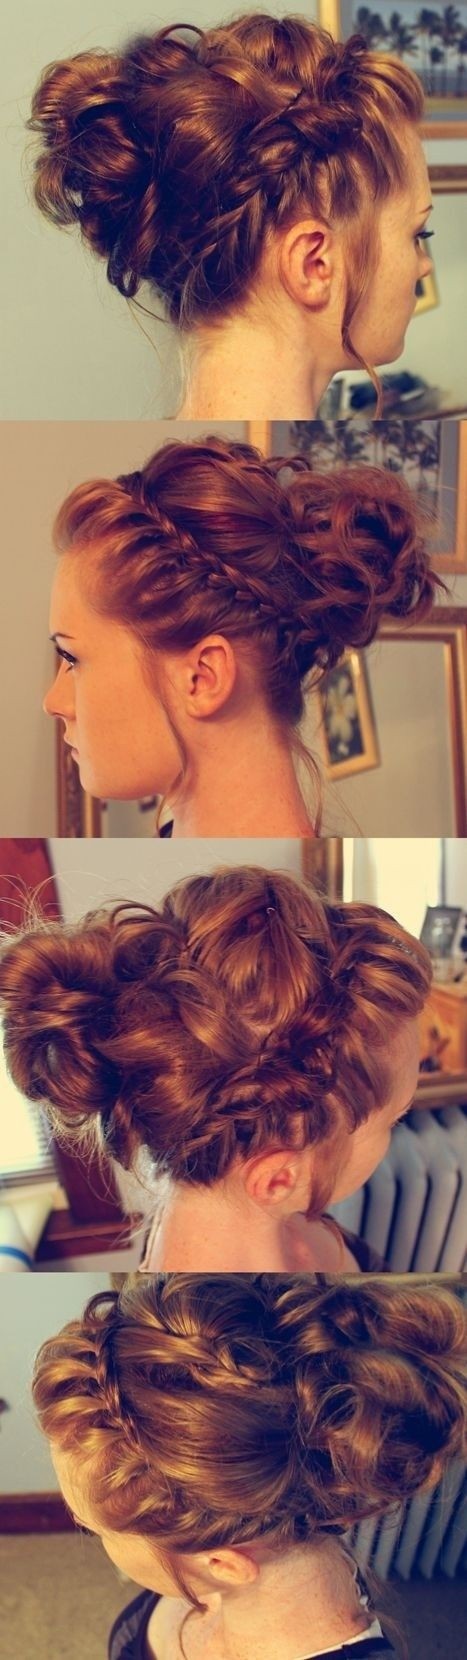 Chic Braided Updo Hairstyle